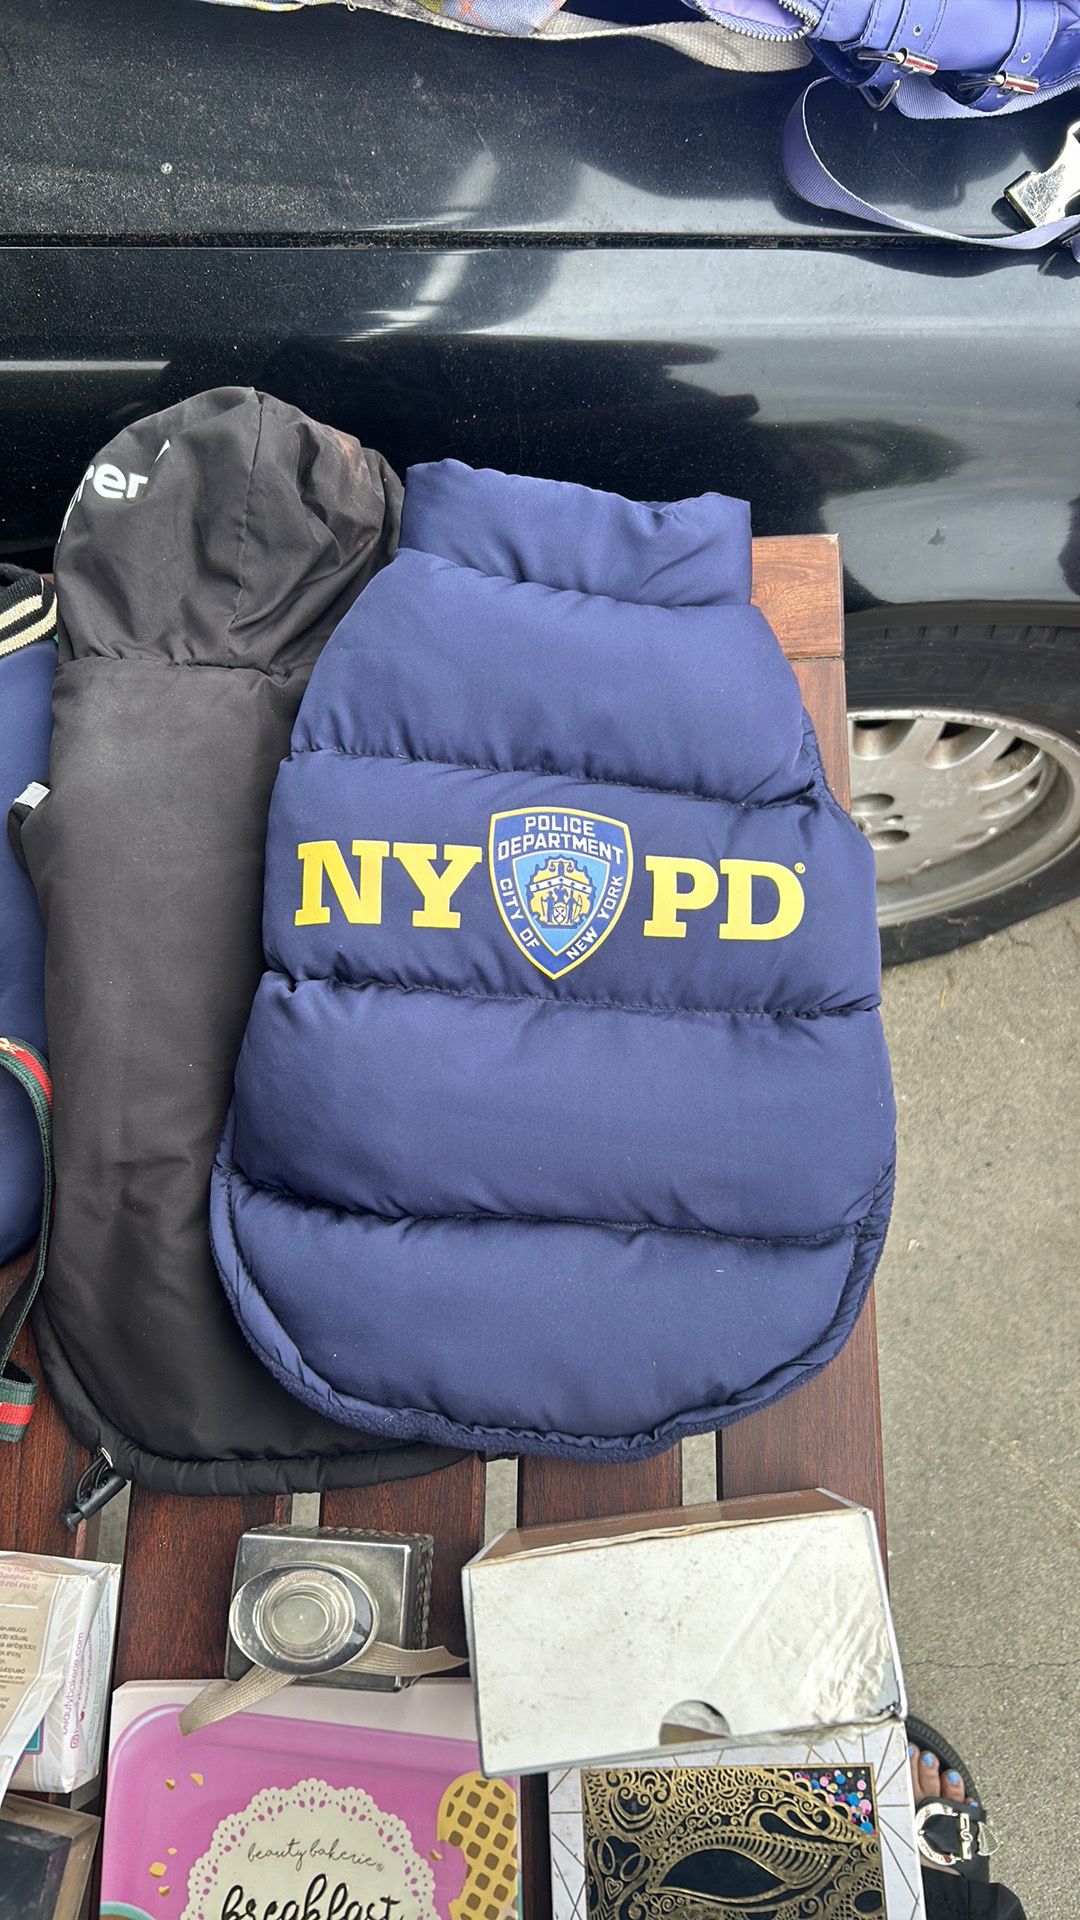 NYPD Puffer Jacket 